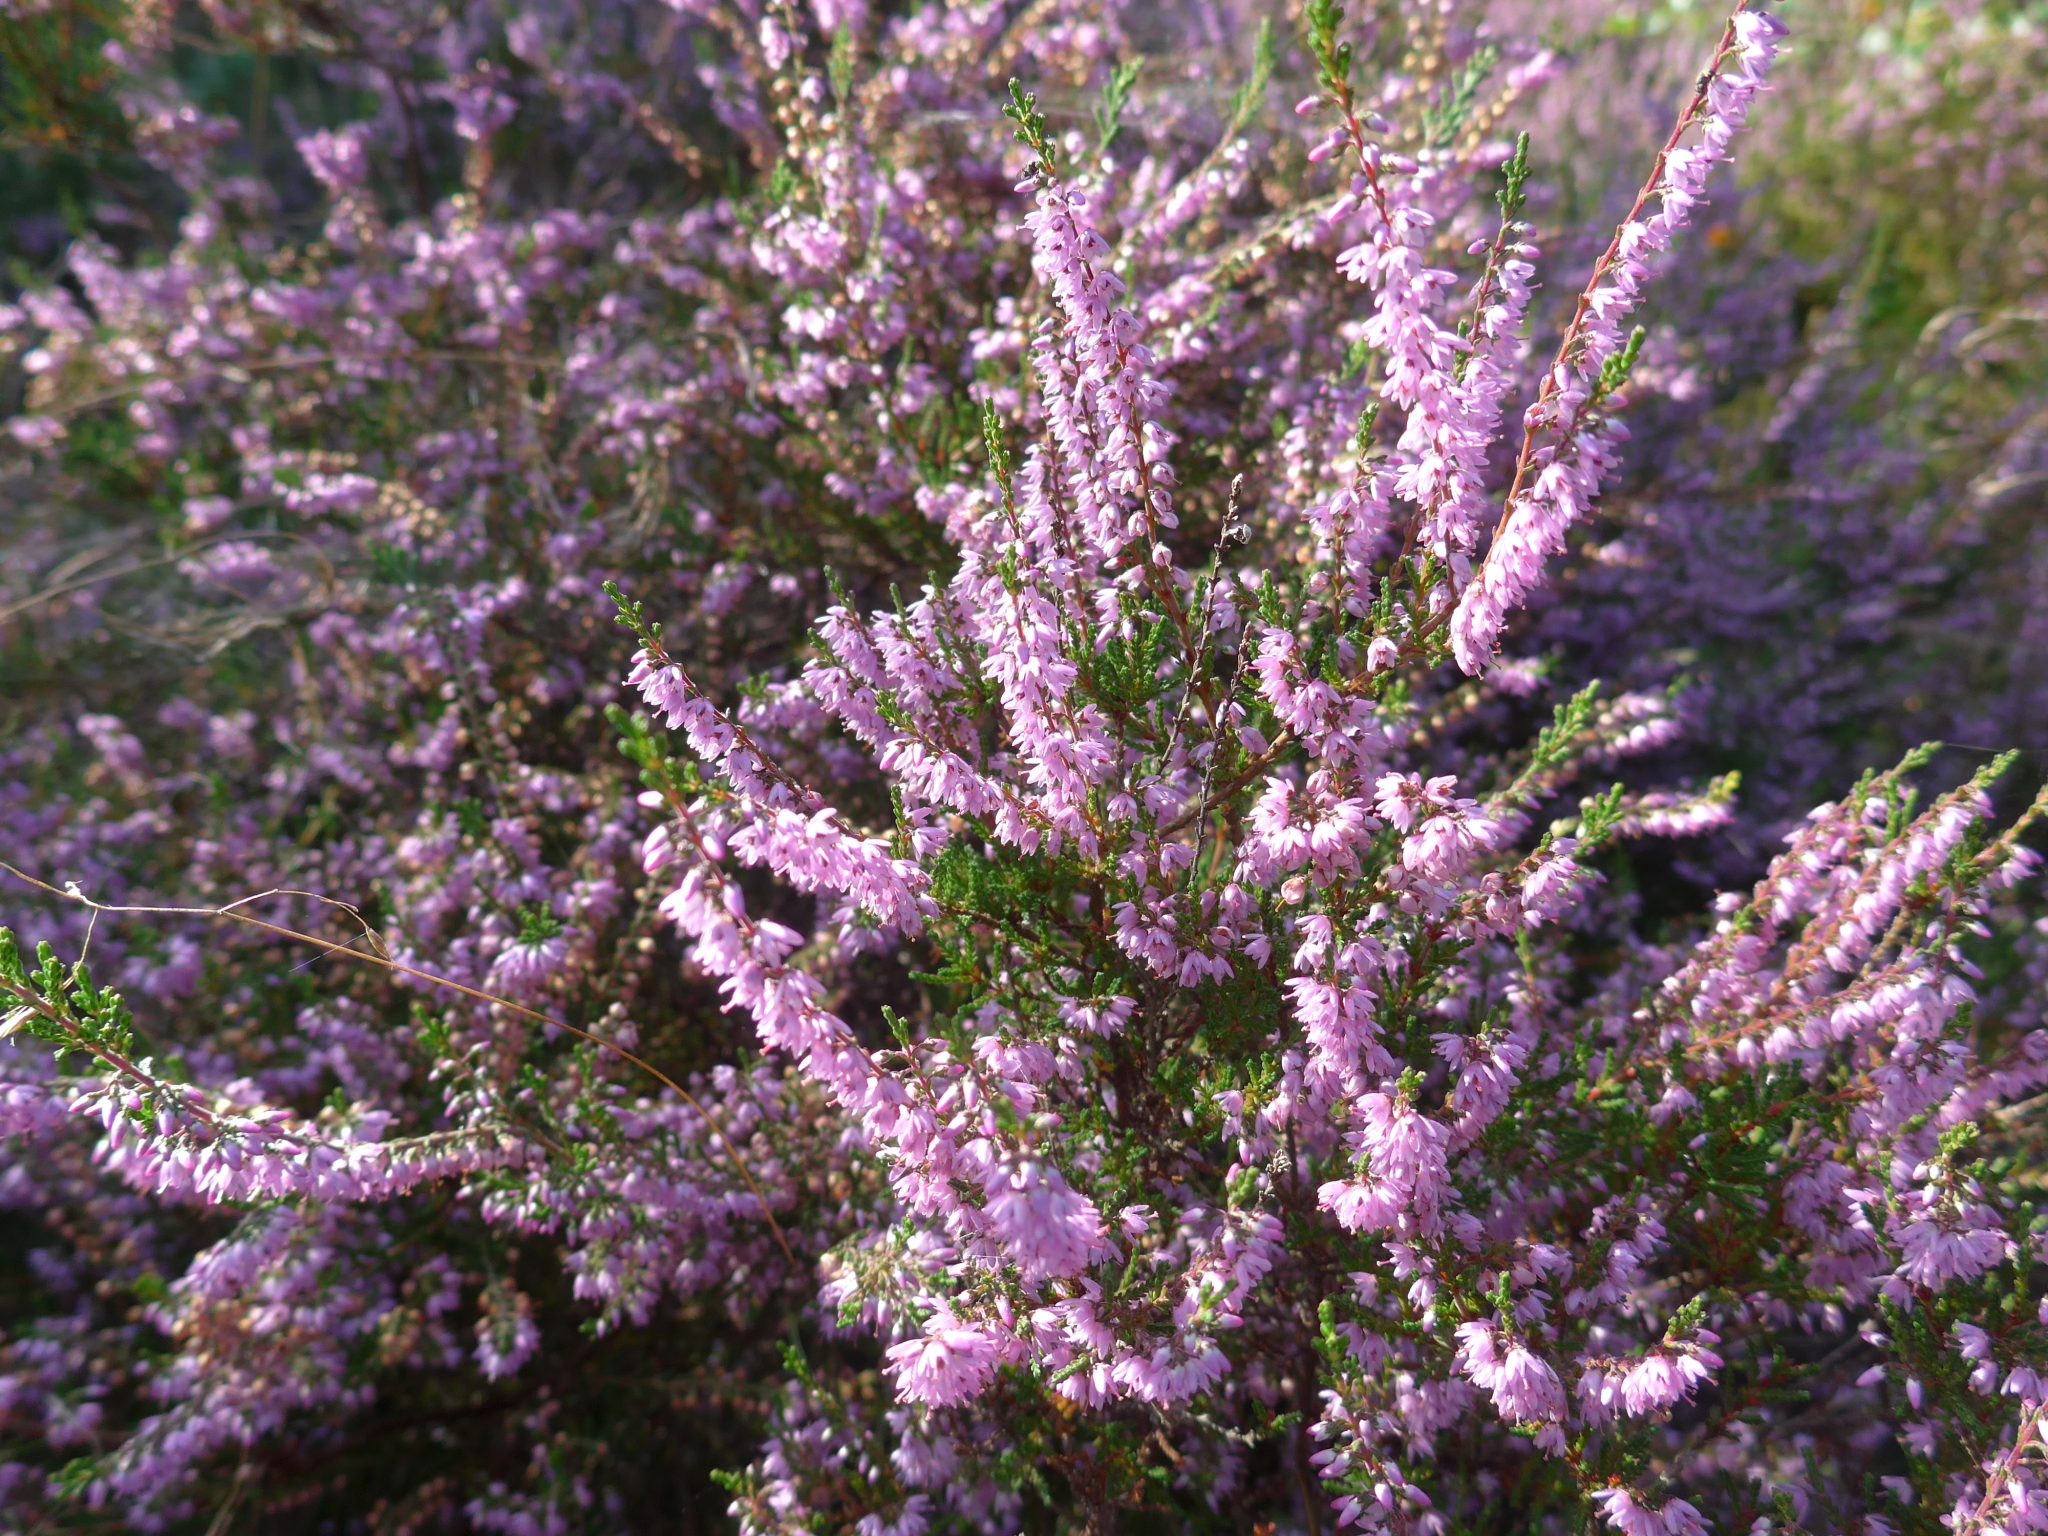 Colorful heather flowers.